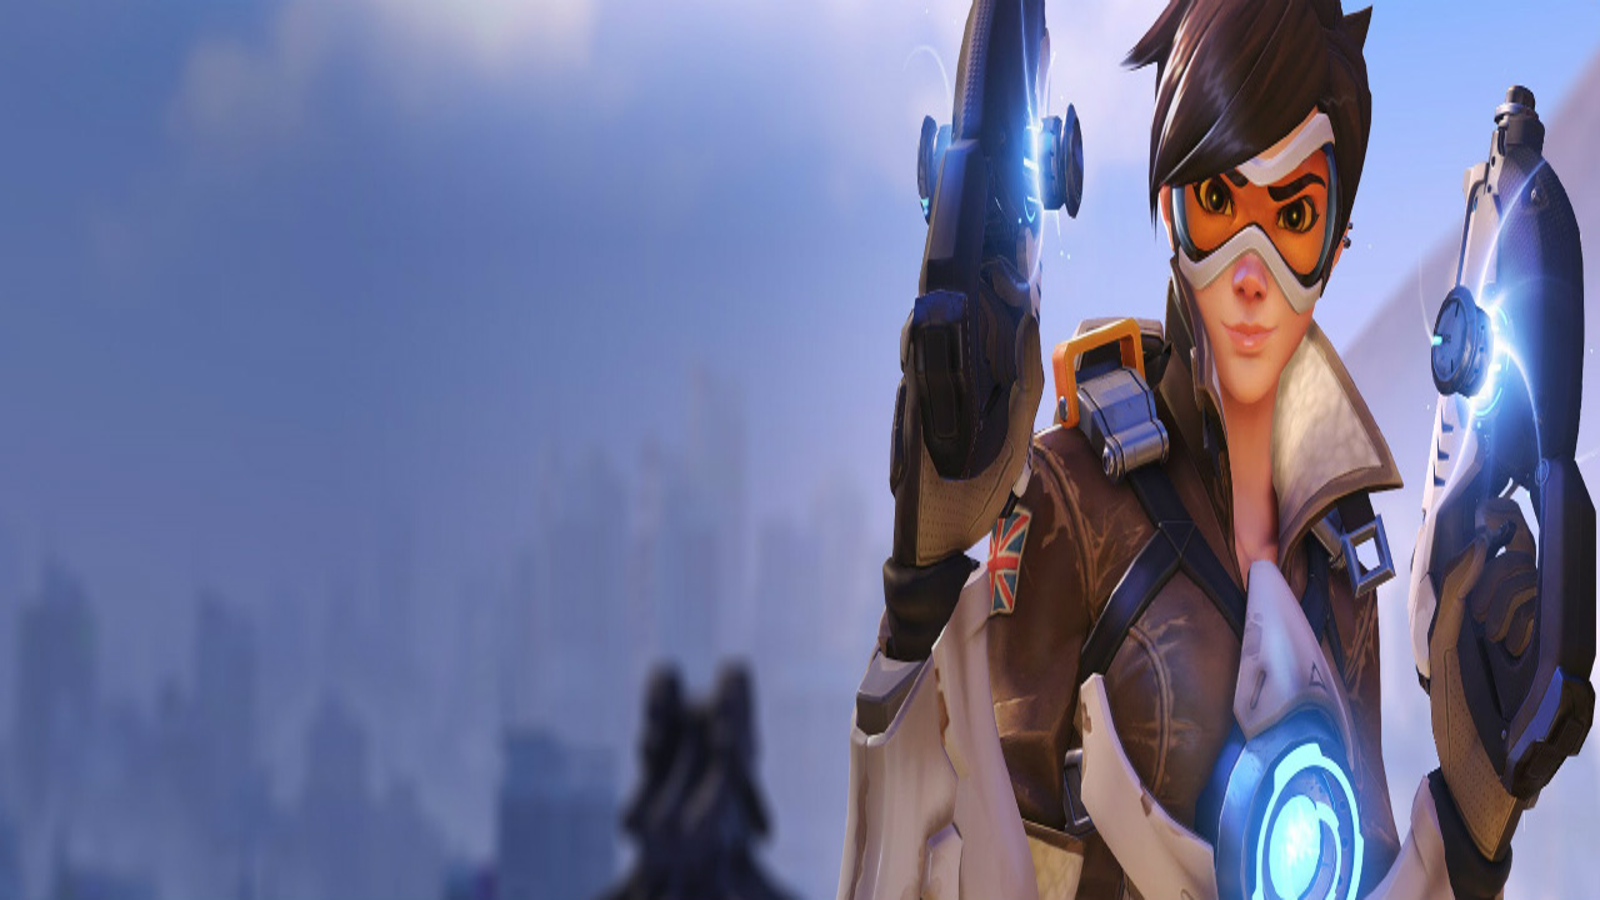 Steam Workshop::TRACER OVERWATCH ANIMATED FIXED